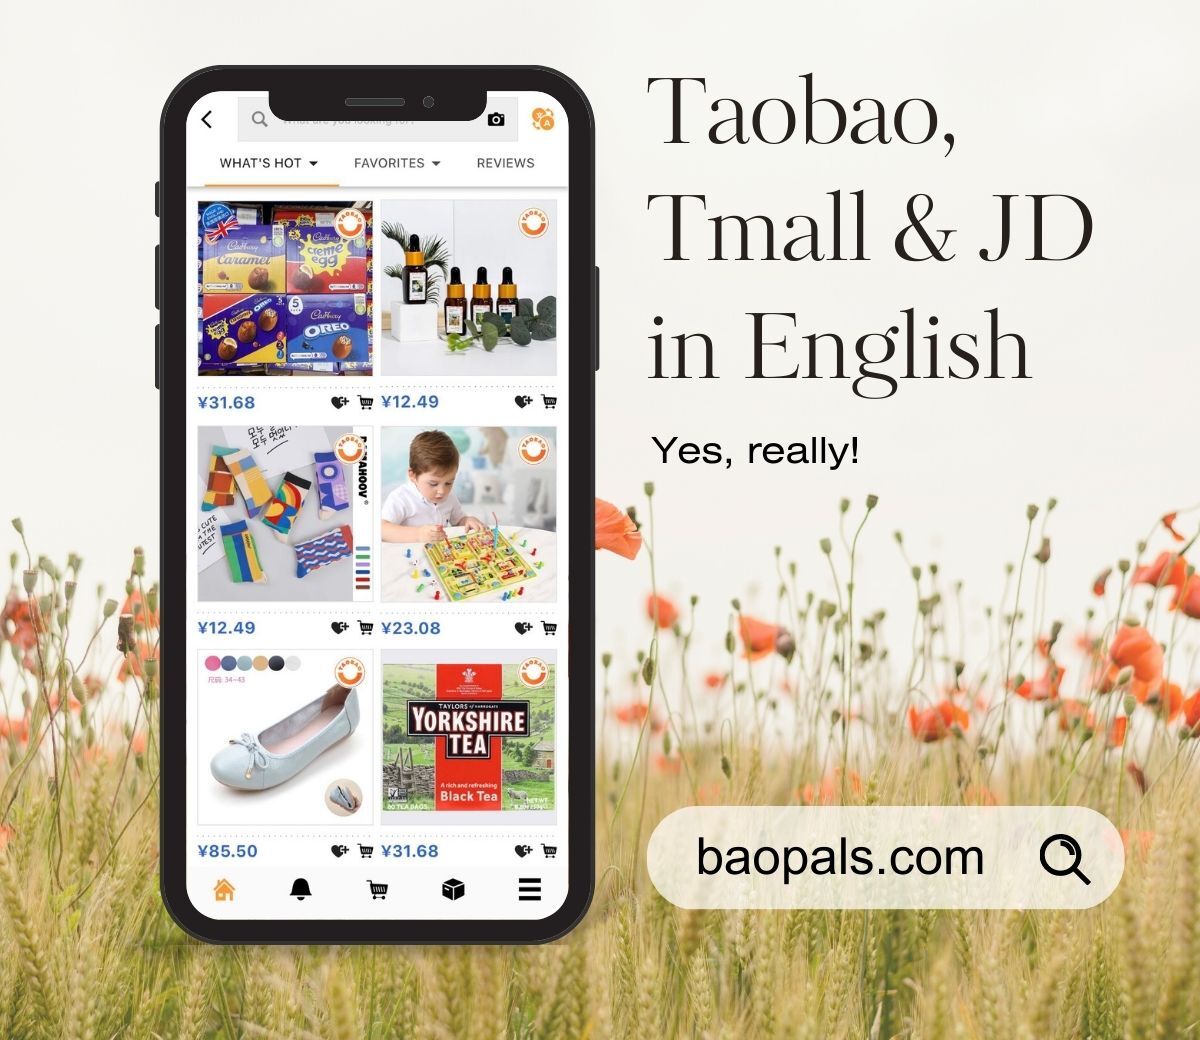 Featured image for “Buy from Taobao, Tmall & JD.com in English with Baopals.com!”